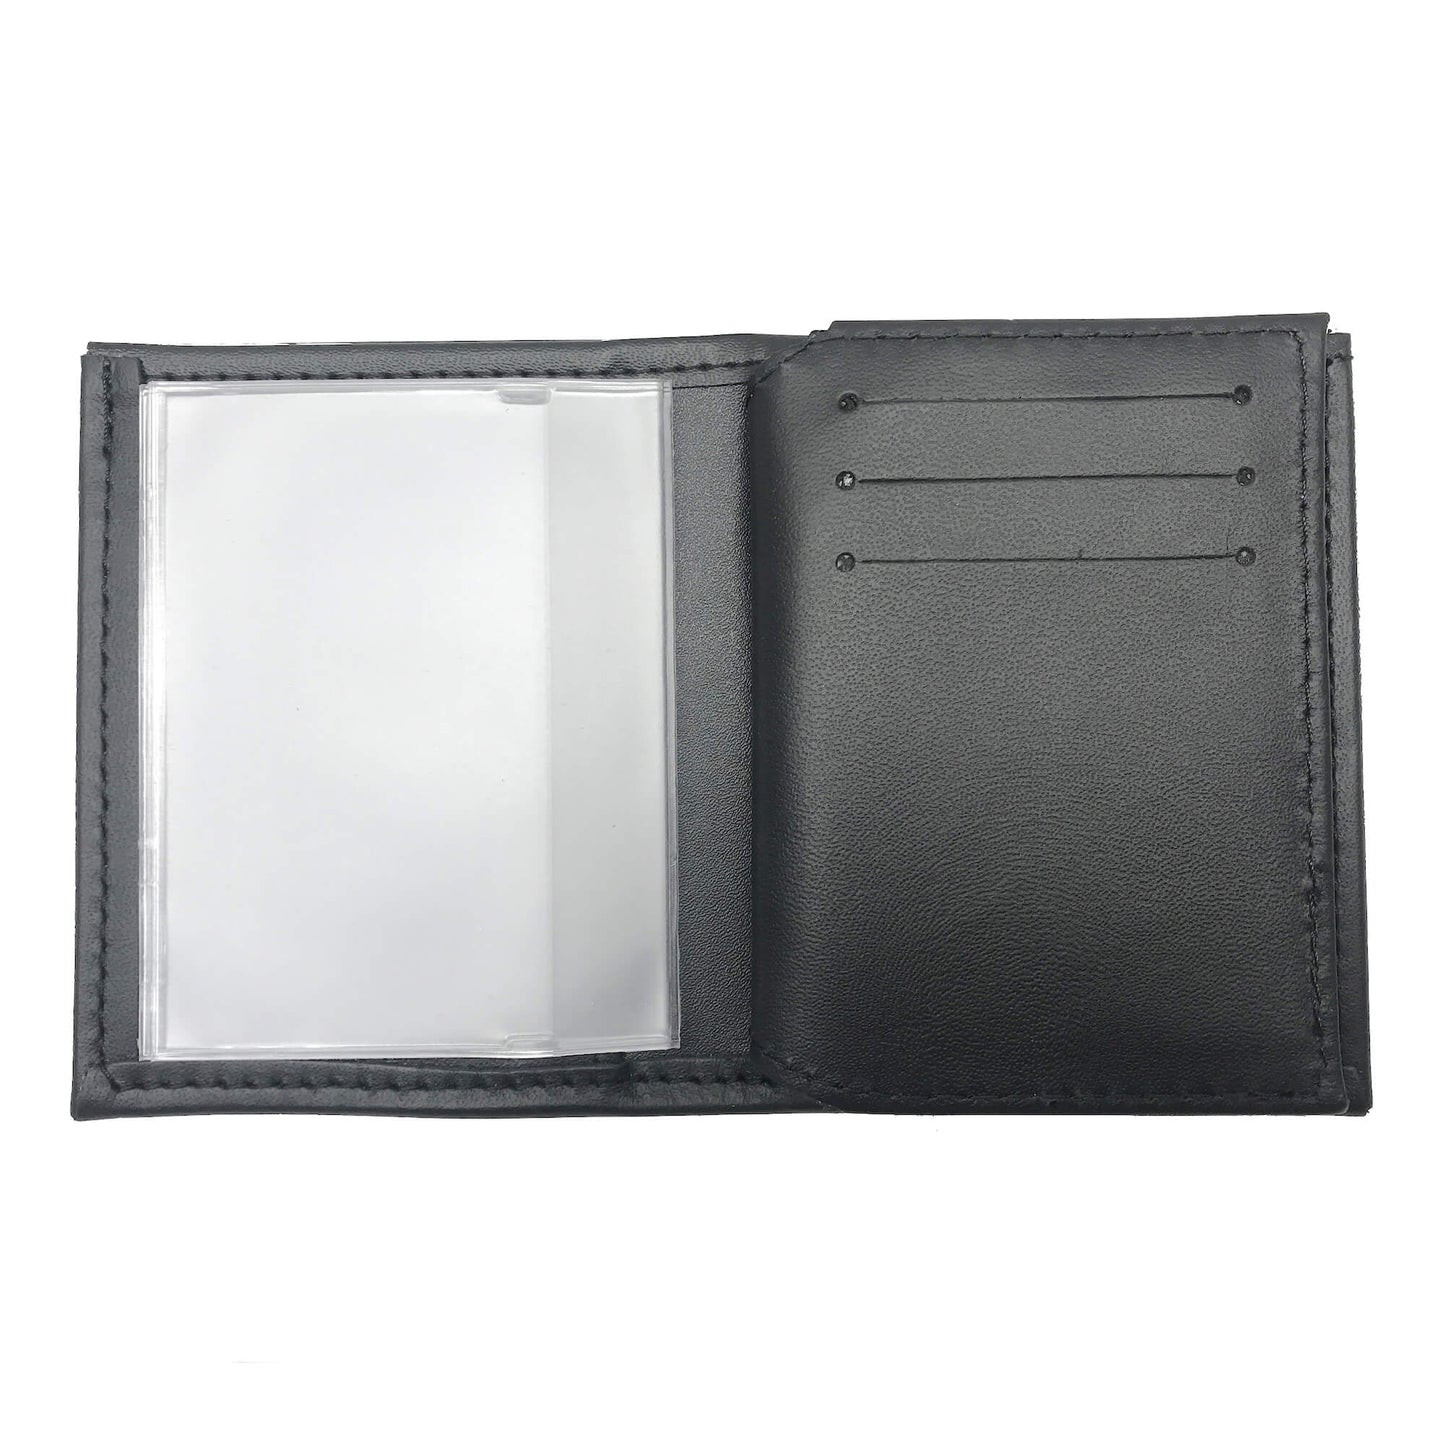 U.S. Customs and Border Protection (CBP) Bifold Hidden Badge Wallet-Perfect Fit-911 Duty Gear USA